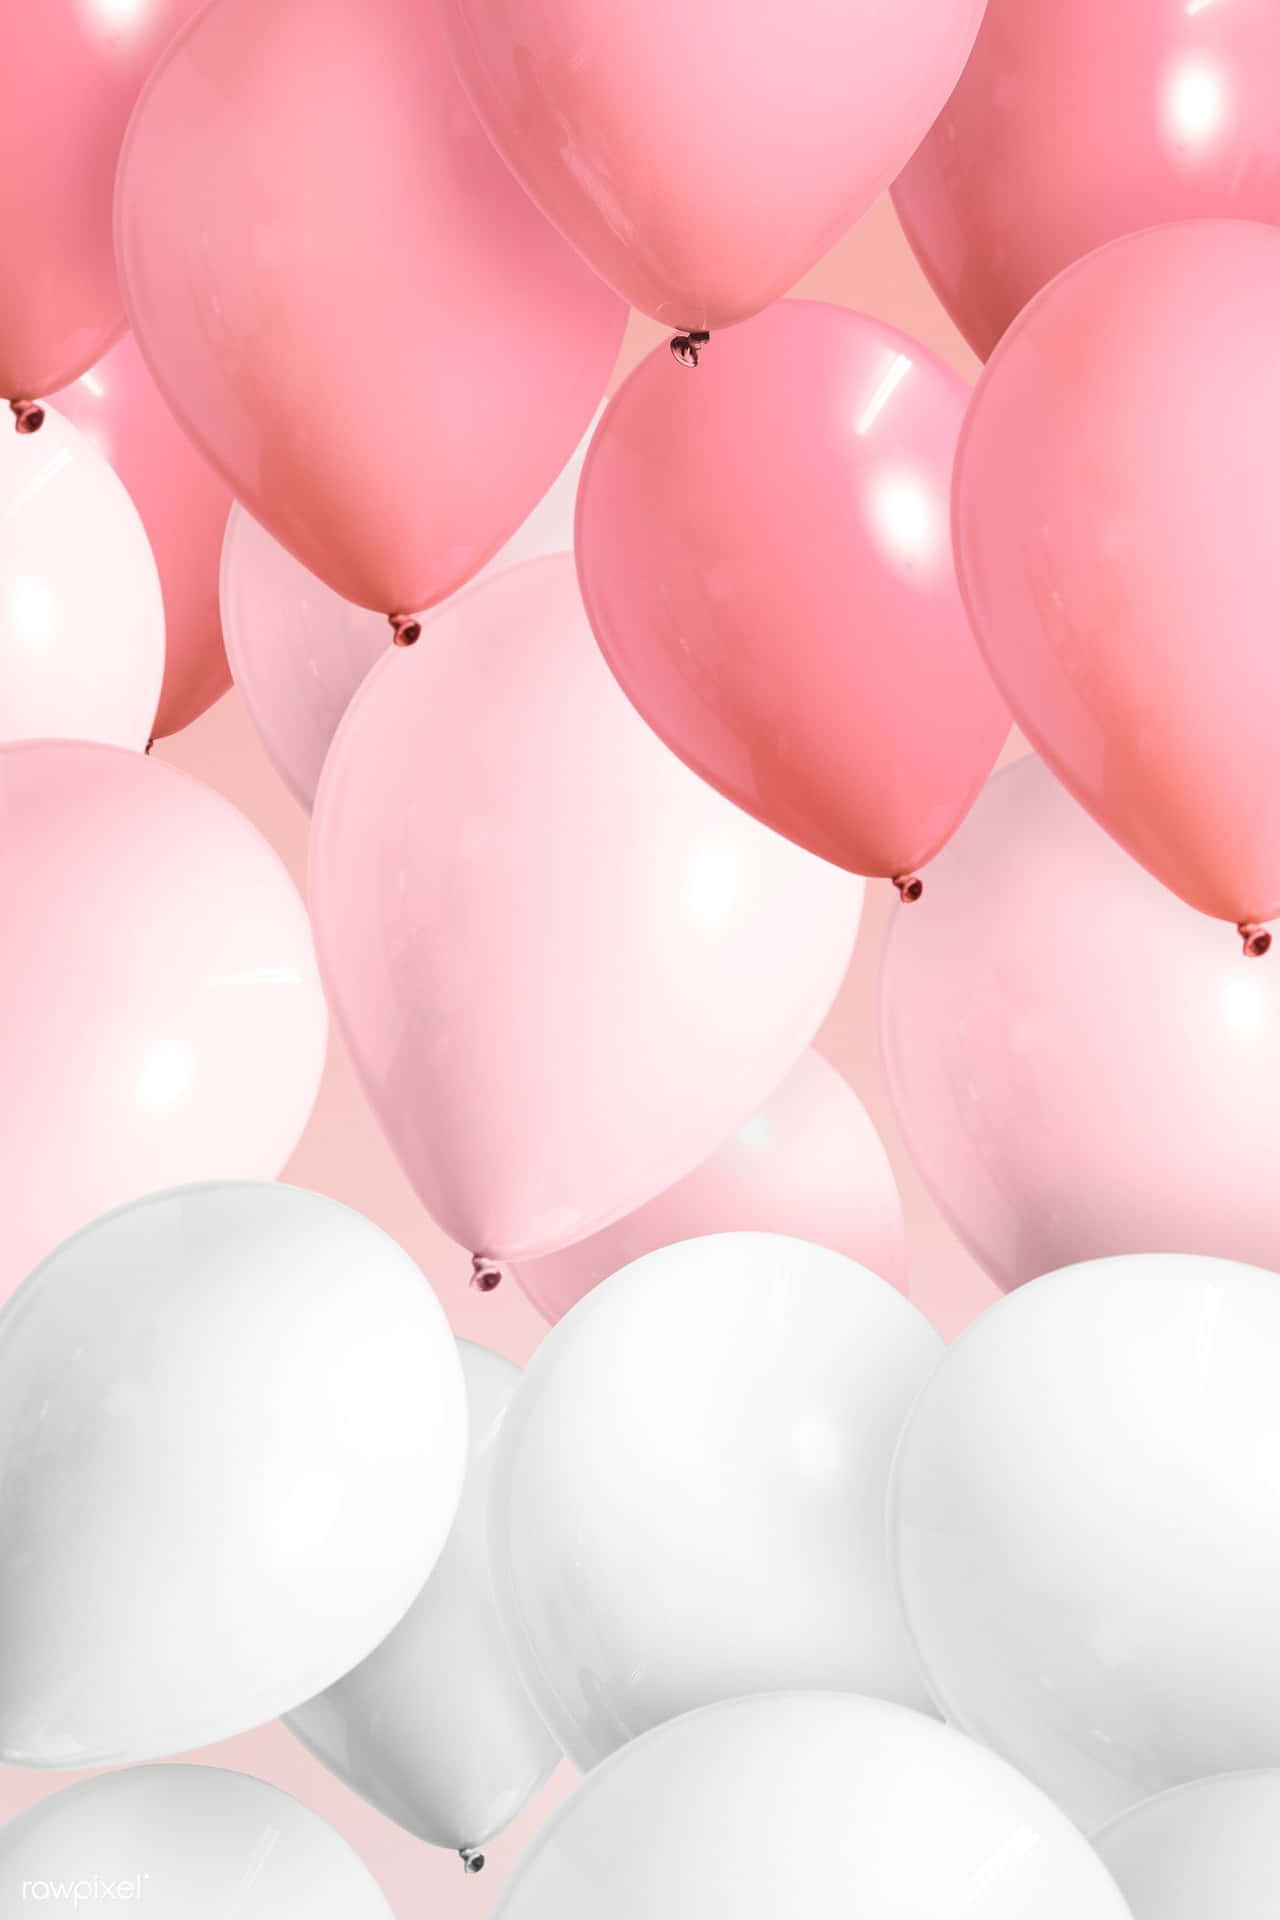 Feel The Joy Of Pink Joy - Experience The Positive Energy Of Pink Balloons.